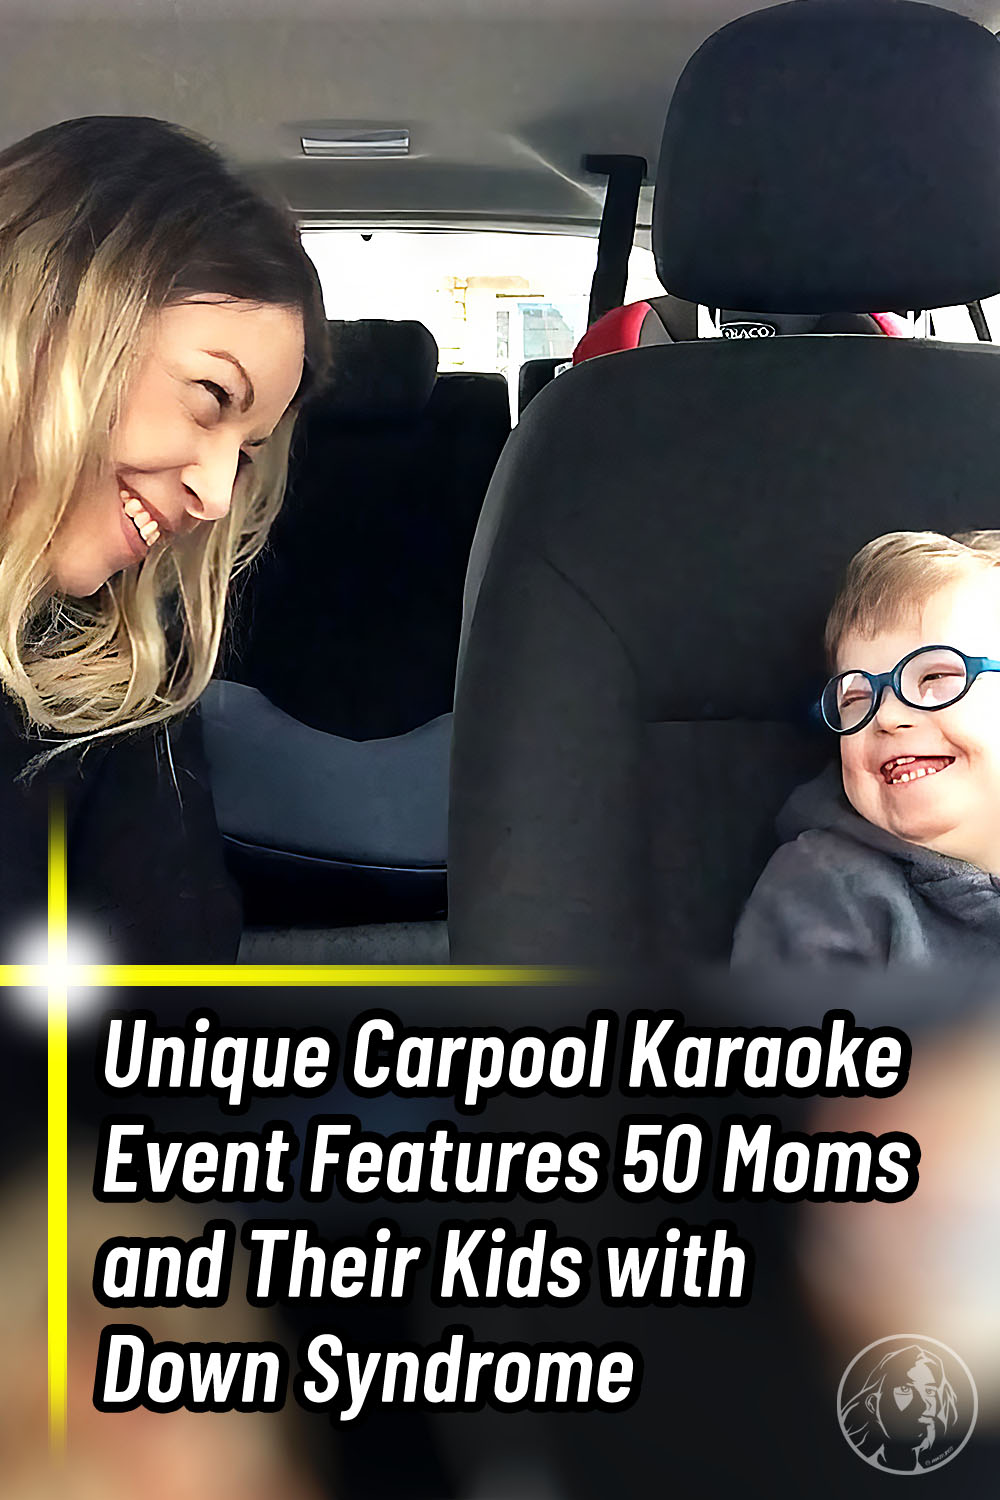 Unique Carpool Karaoke Event Features 50 Moms and Their Kids with Down Syndrome